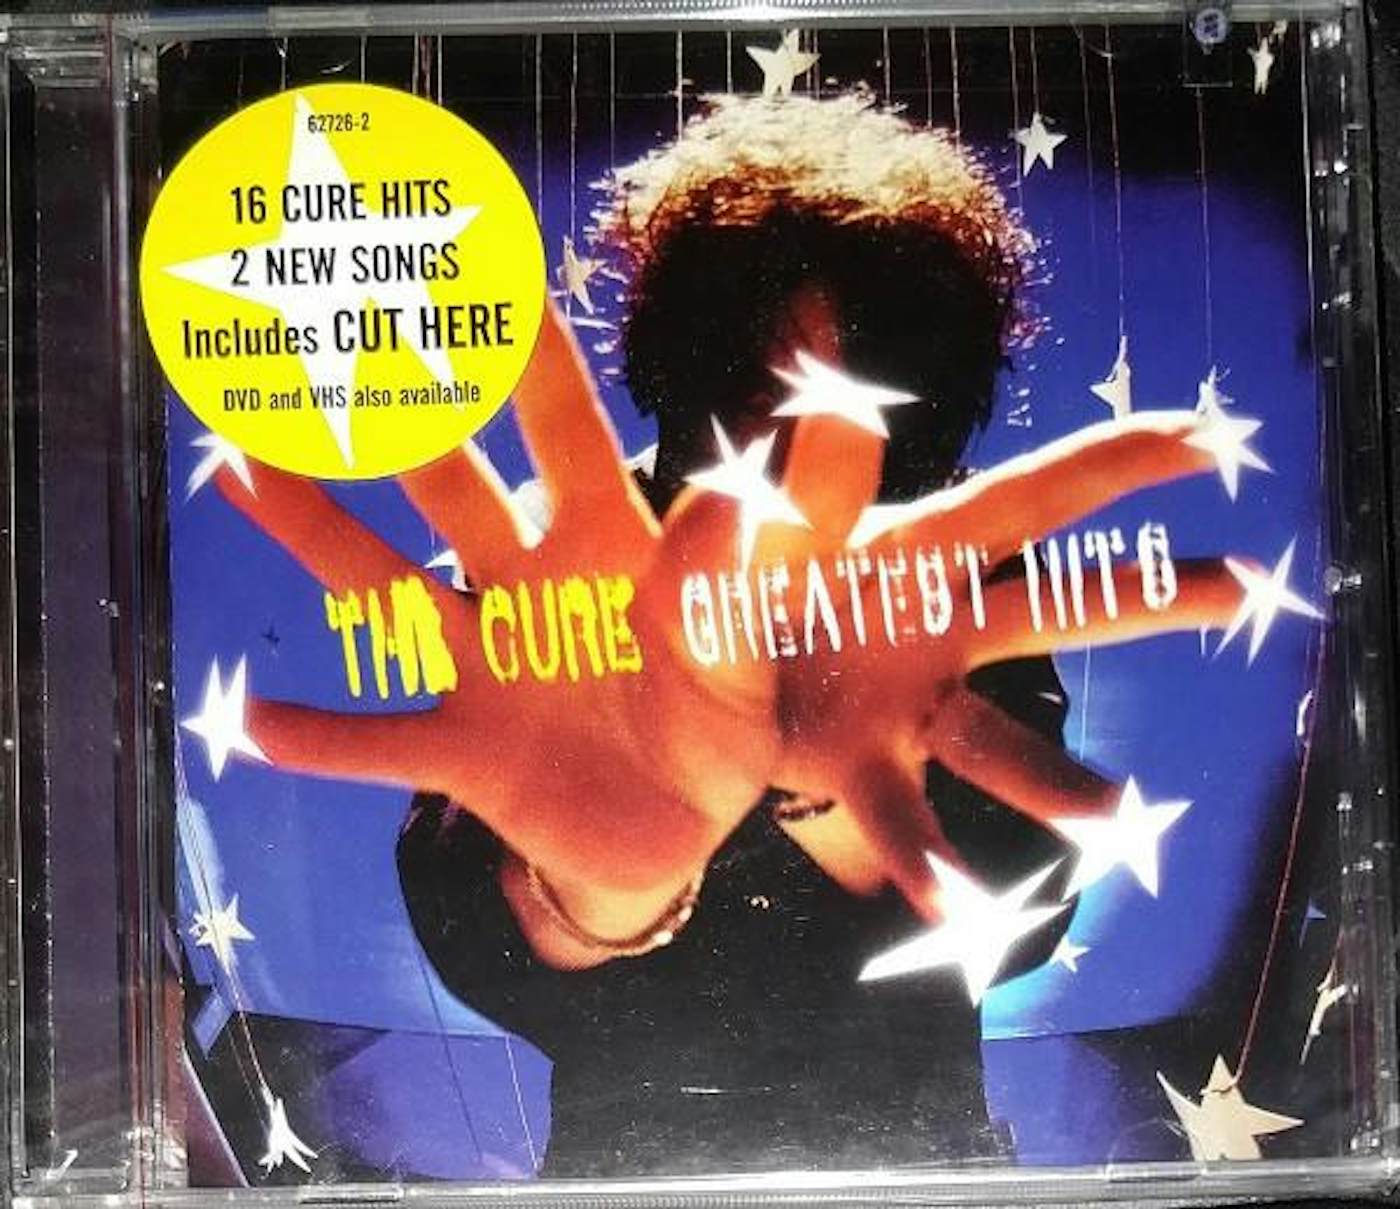 The Cure GREATEST HITS CD